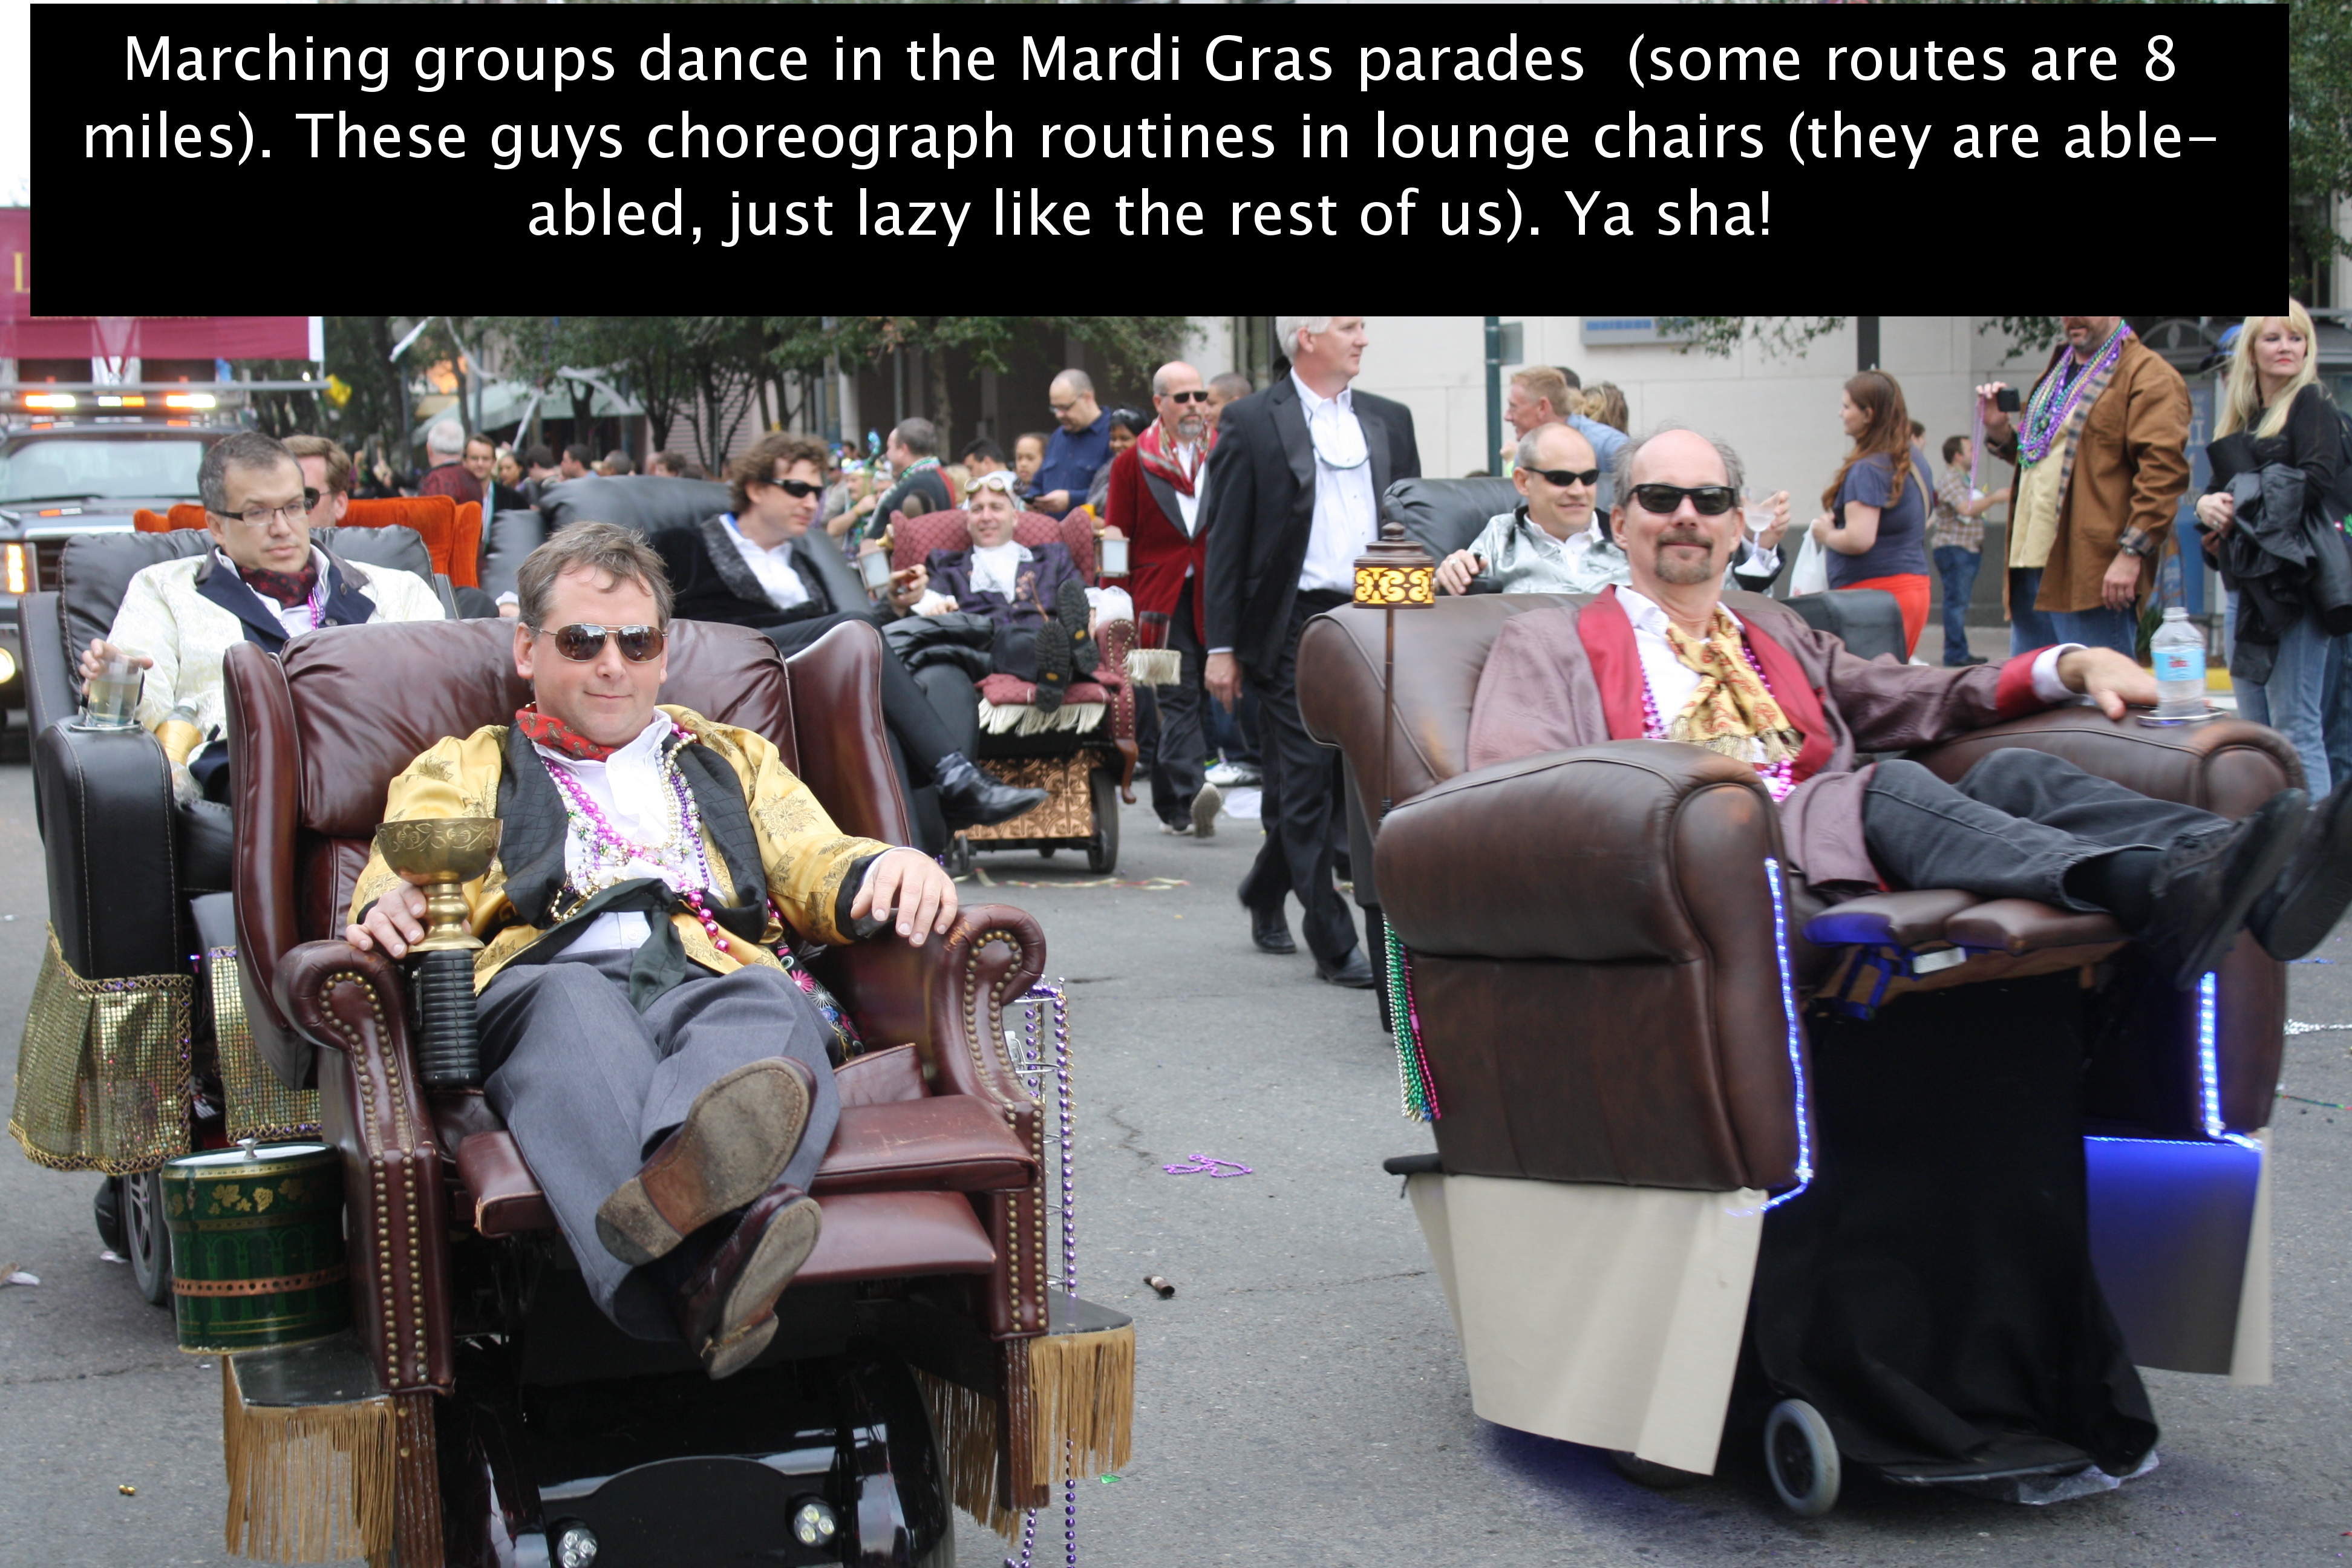 mardi gras photos - Marching groups dance in the Mardi Gras parades some routes are 8 miles. These guys choreograph routines in lounge chairs they are able abled, just lazy the rest of us. Ya sha!